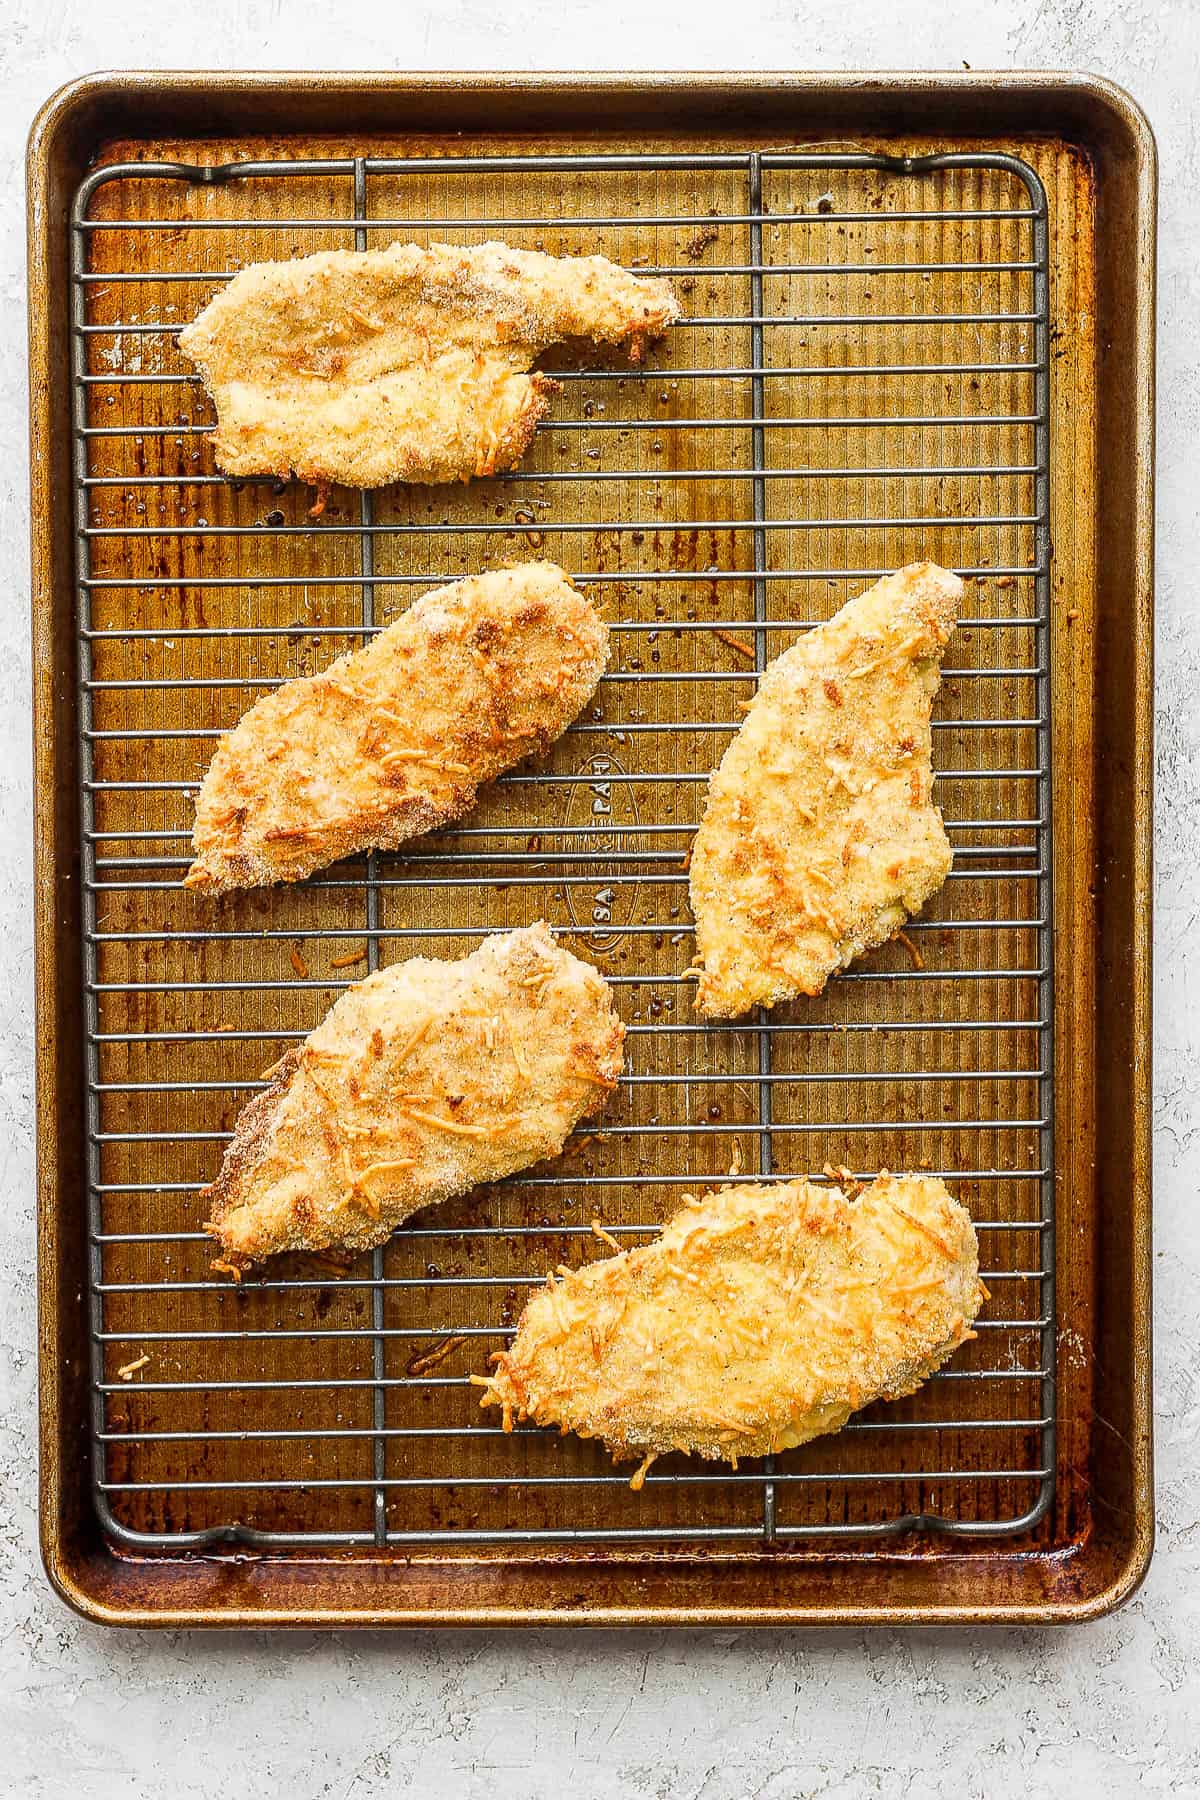 Fully baked chicken cutlets on the wire rack.